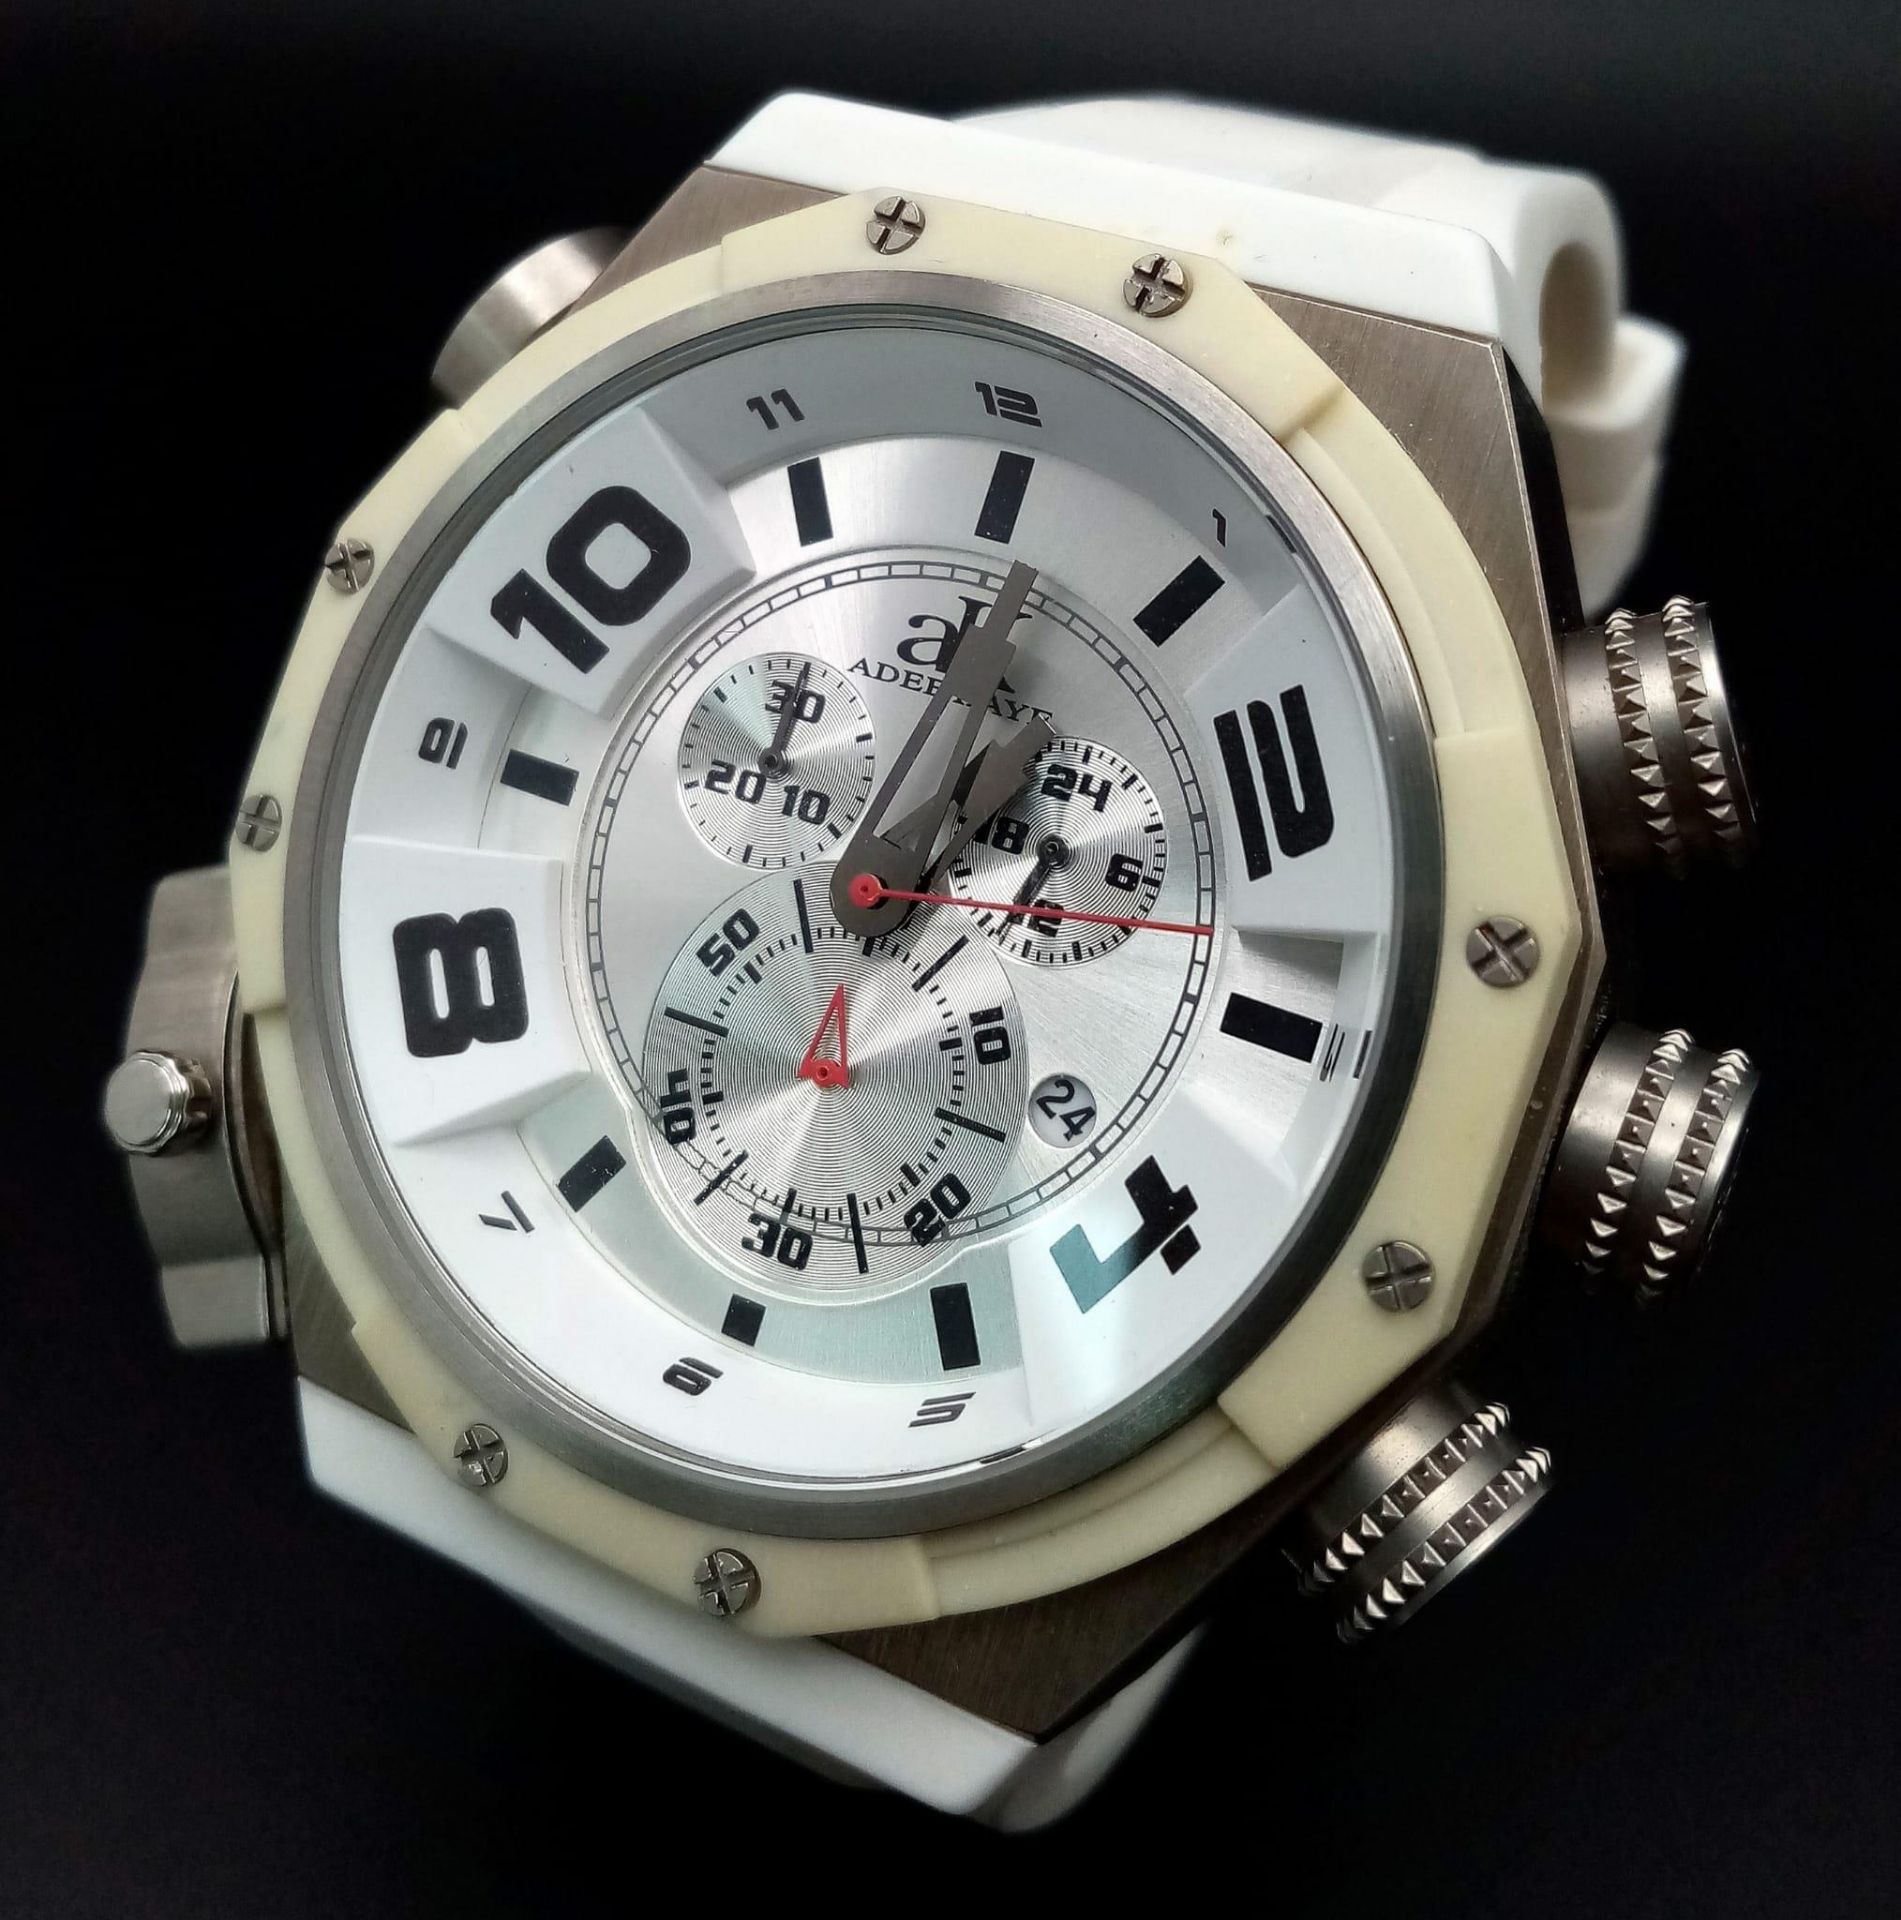 A Limited Edition Run Adee Kaye, Beverley Hills, Oversize Sports Chronograph. 65mm Including